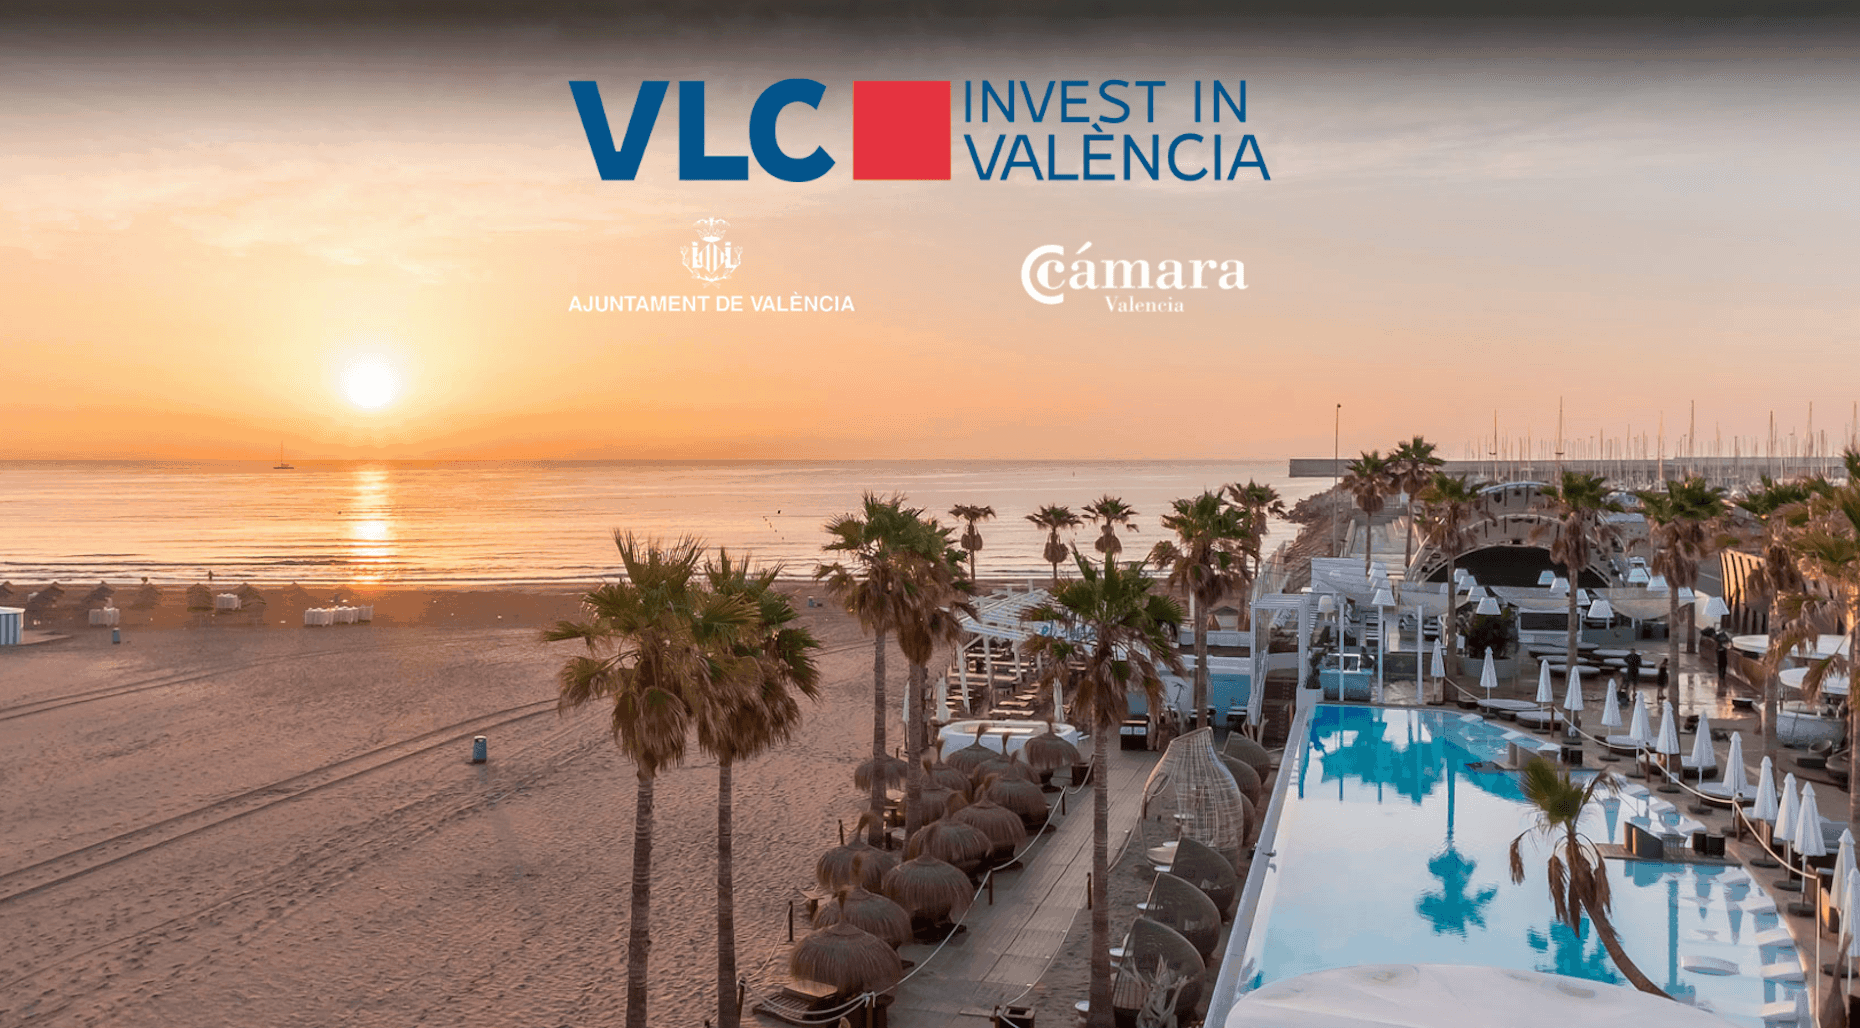 A Night With Invest in València